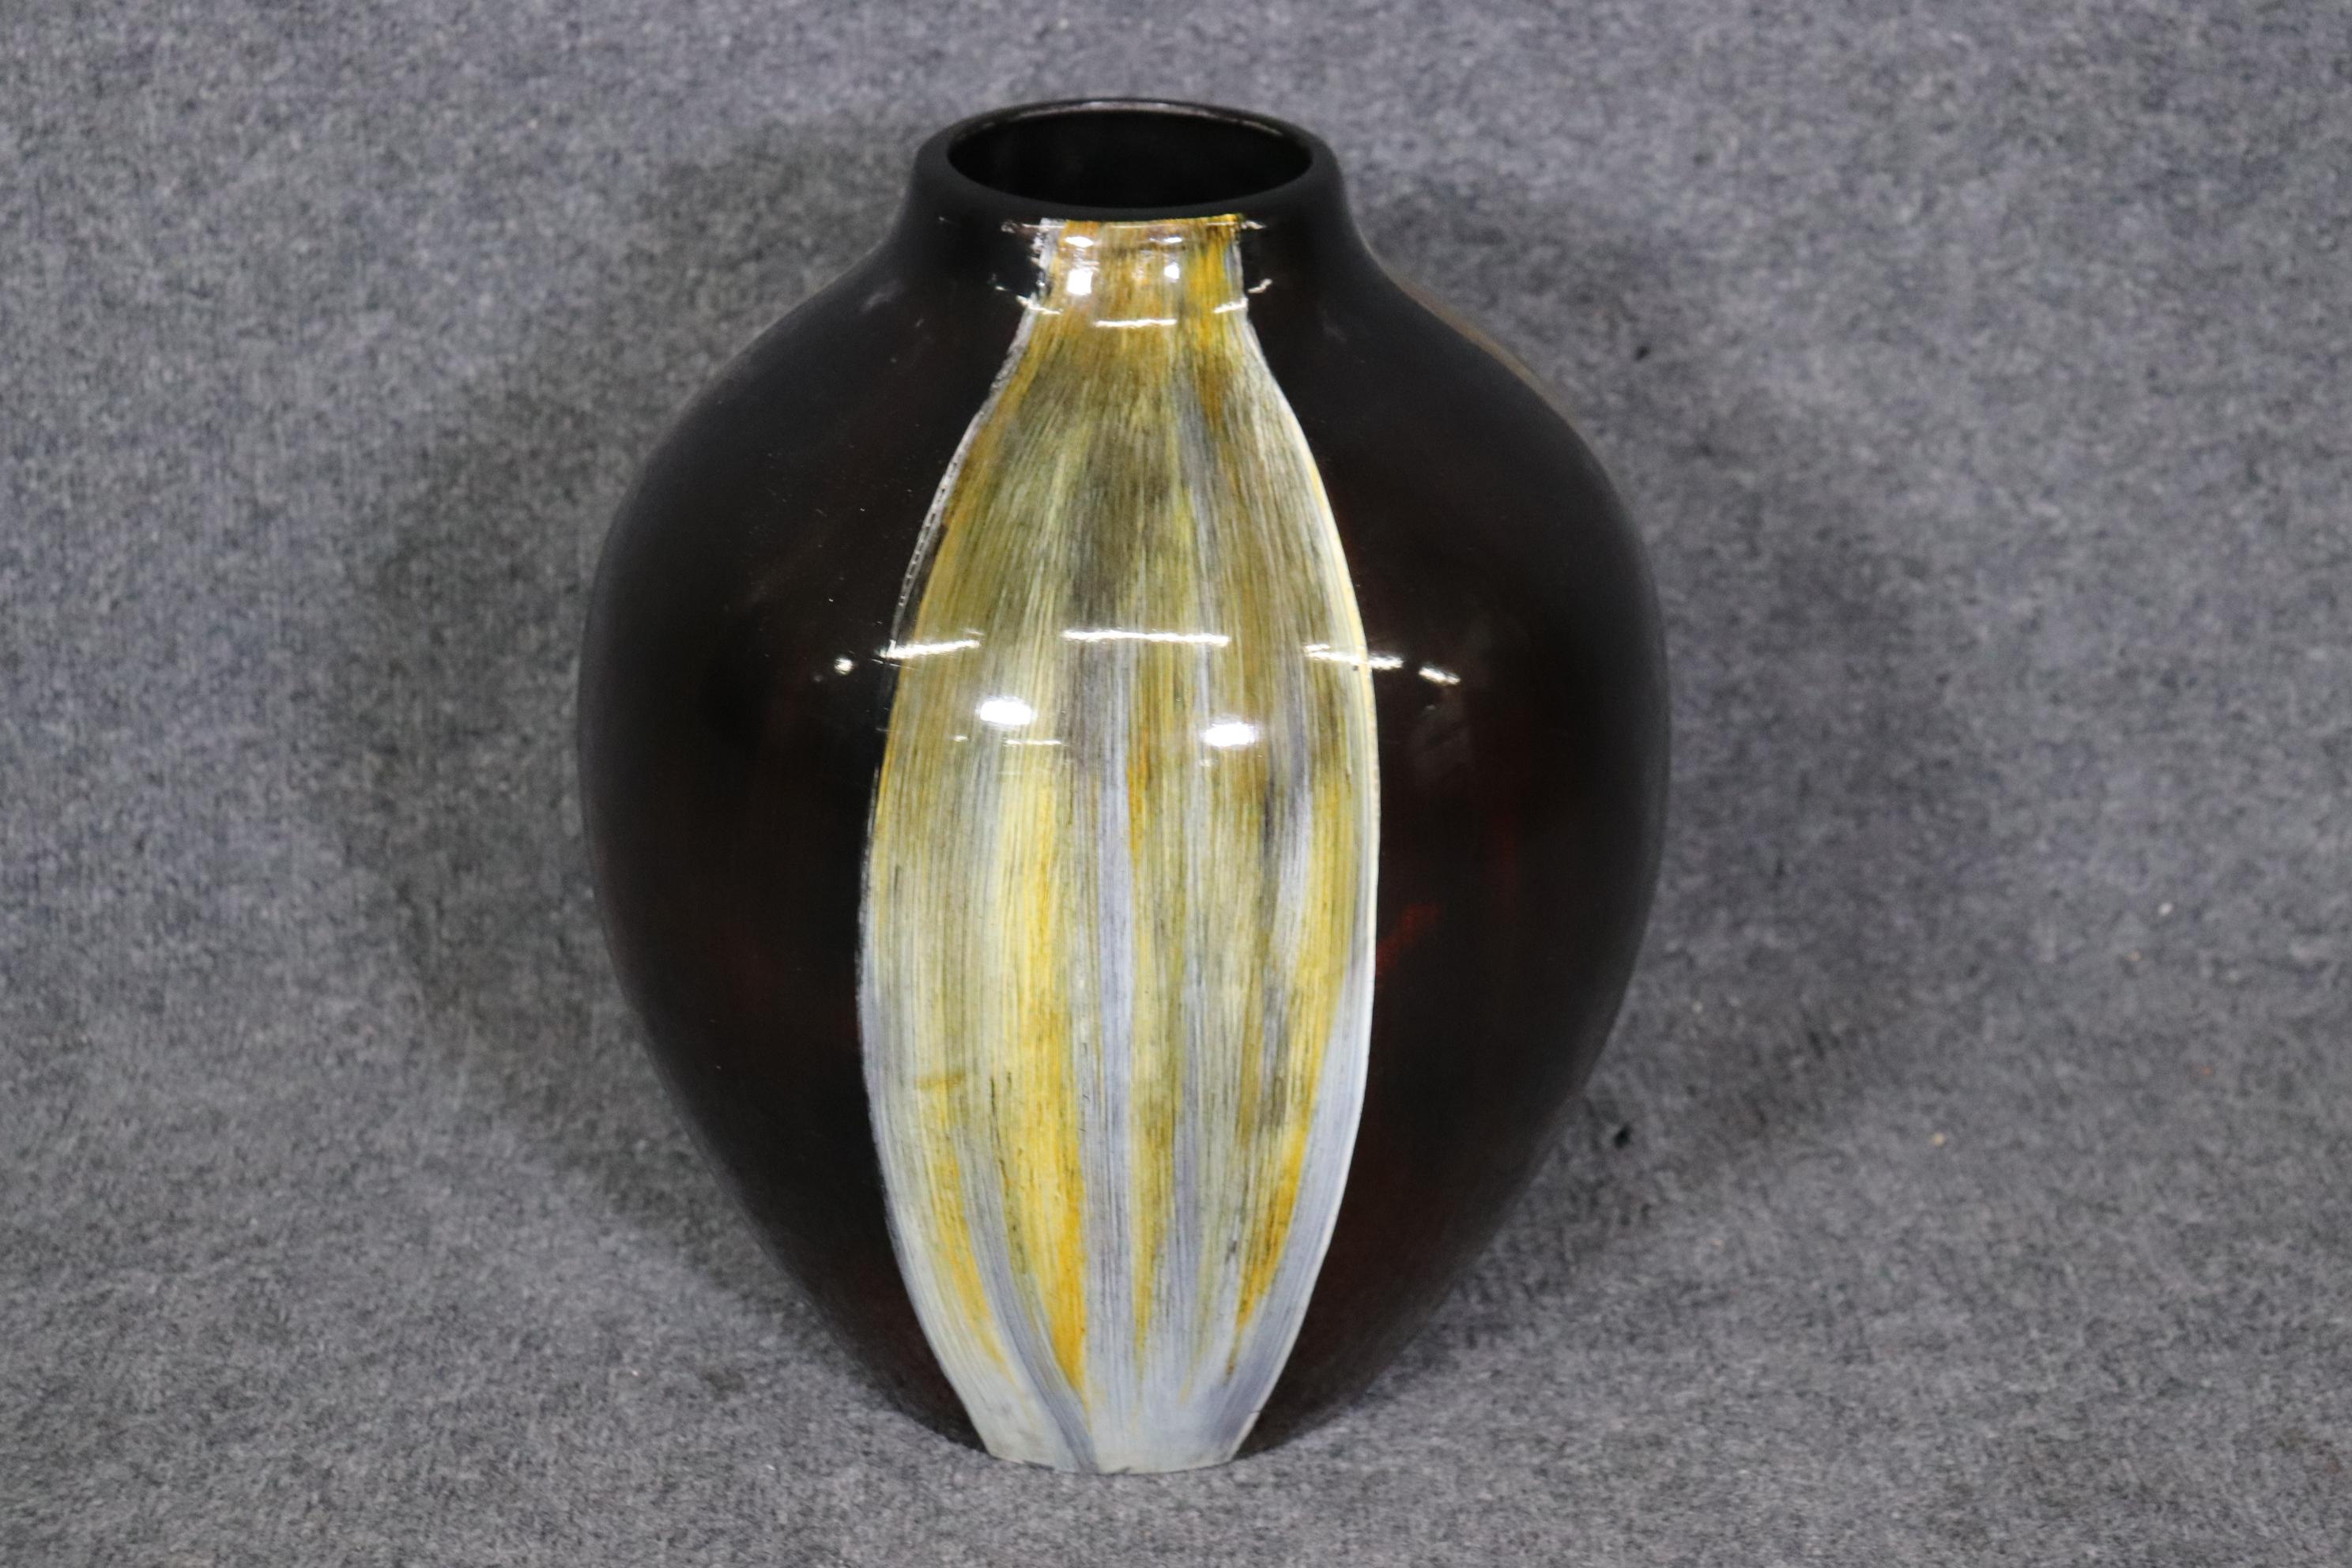 Dimensions: Height: 14 in Width: 10 3/4 in Depth: 10 3/4 in 

This Vintage Mid Century Modern pottery art vase is made of the highest quality. If you look at the photos provided, you will see the attention to detail in the art. This vase will